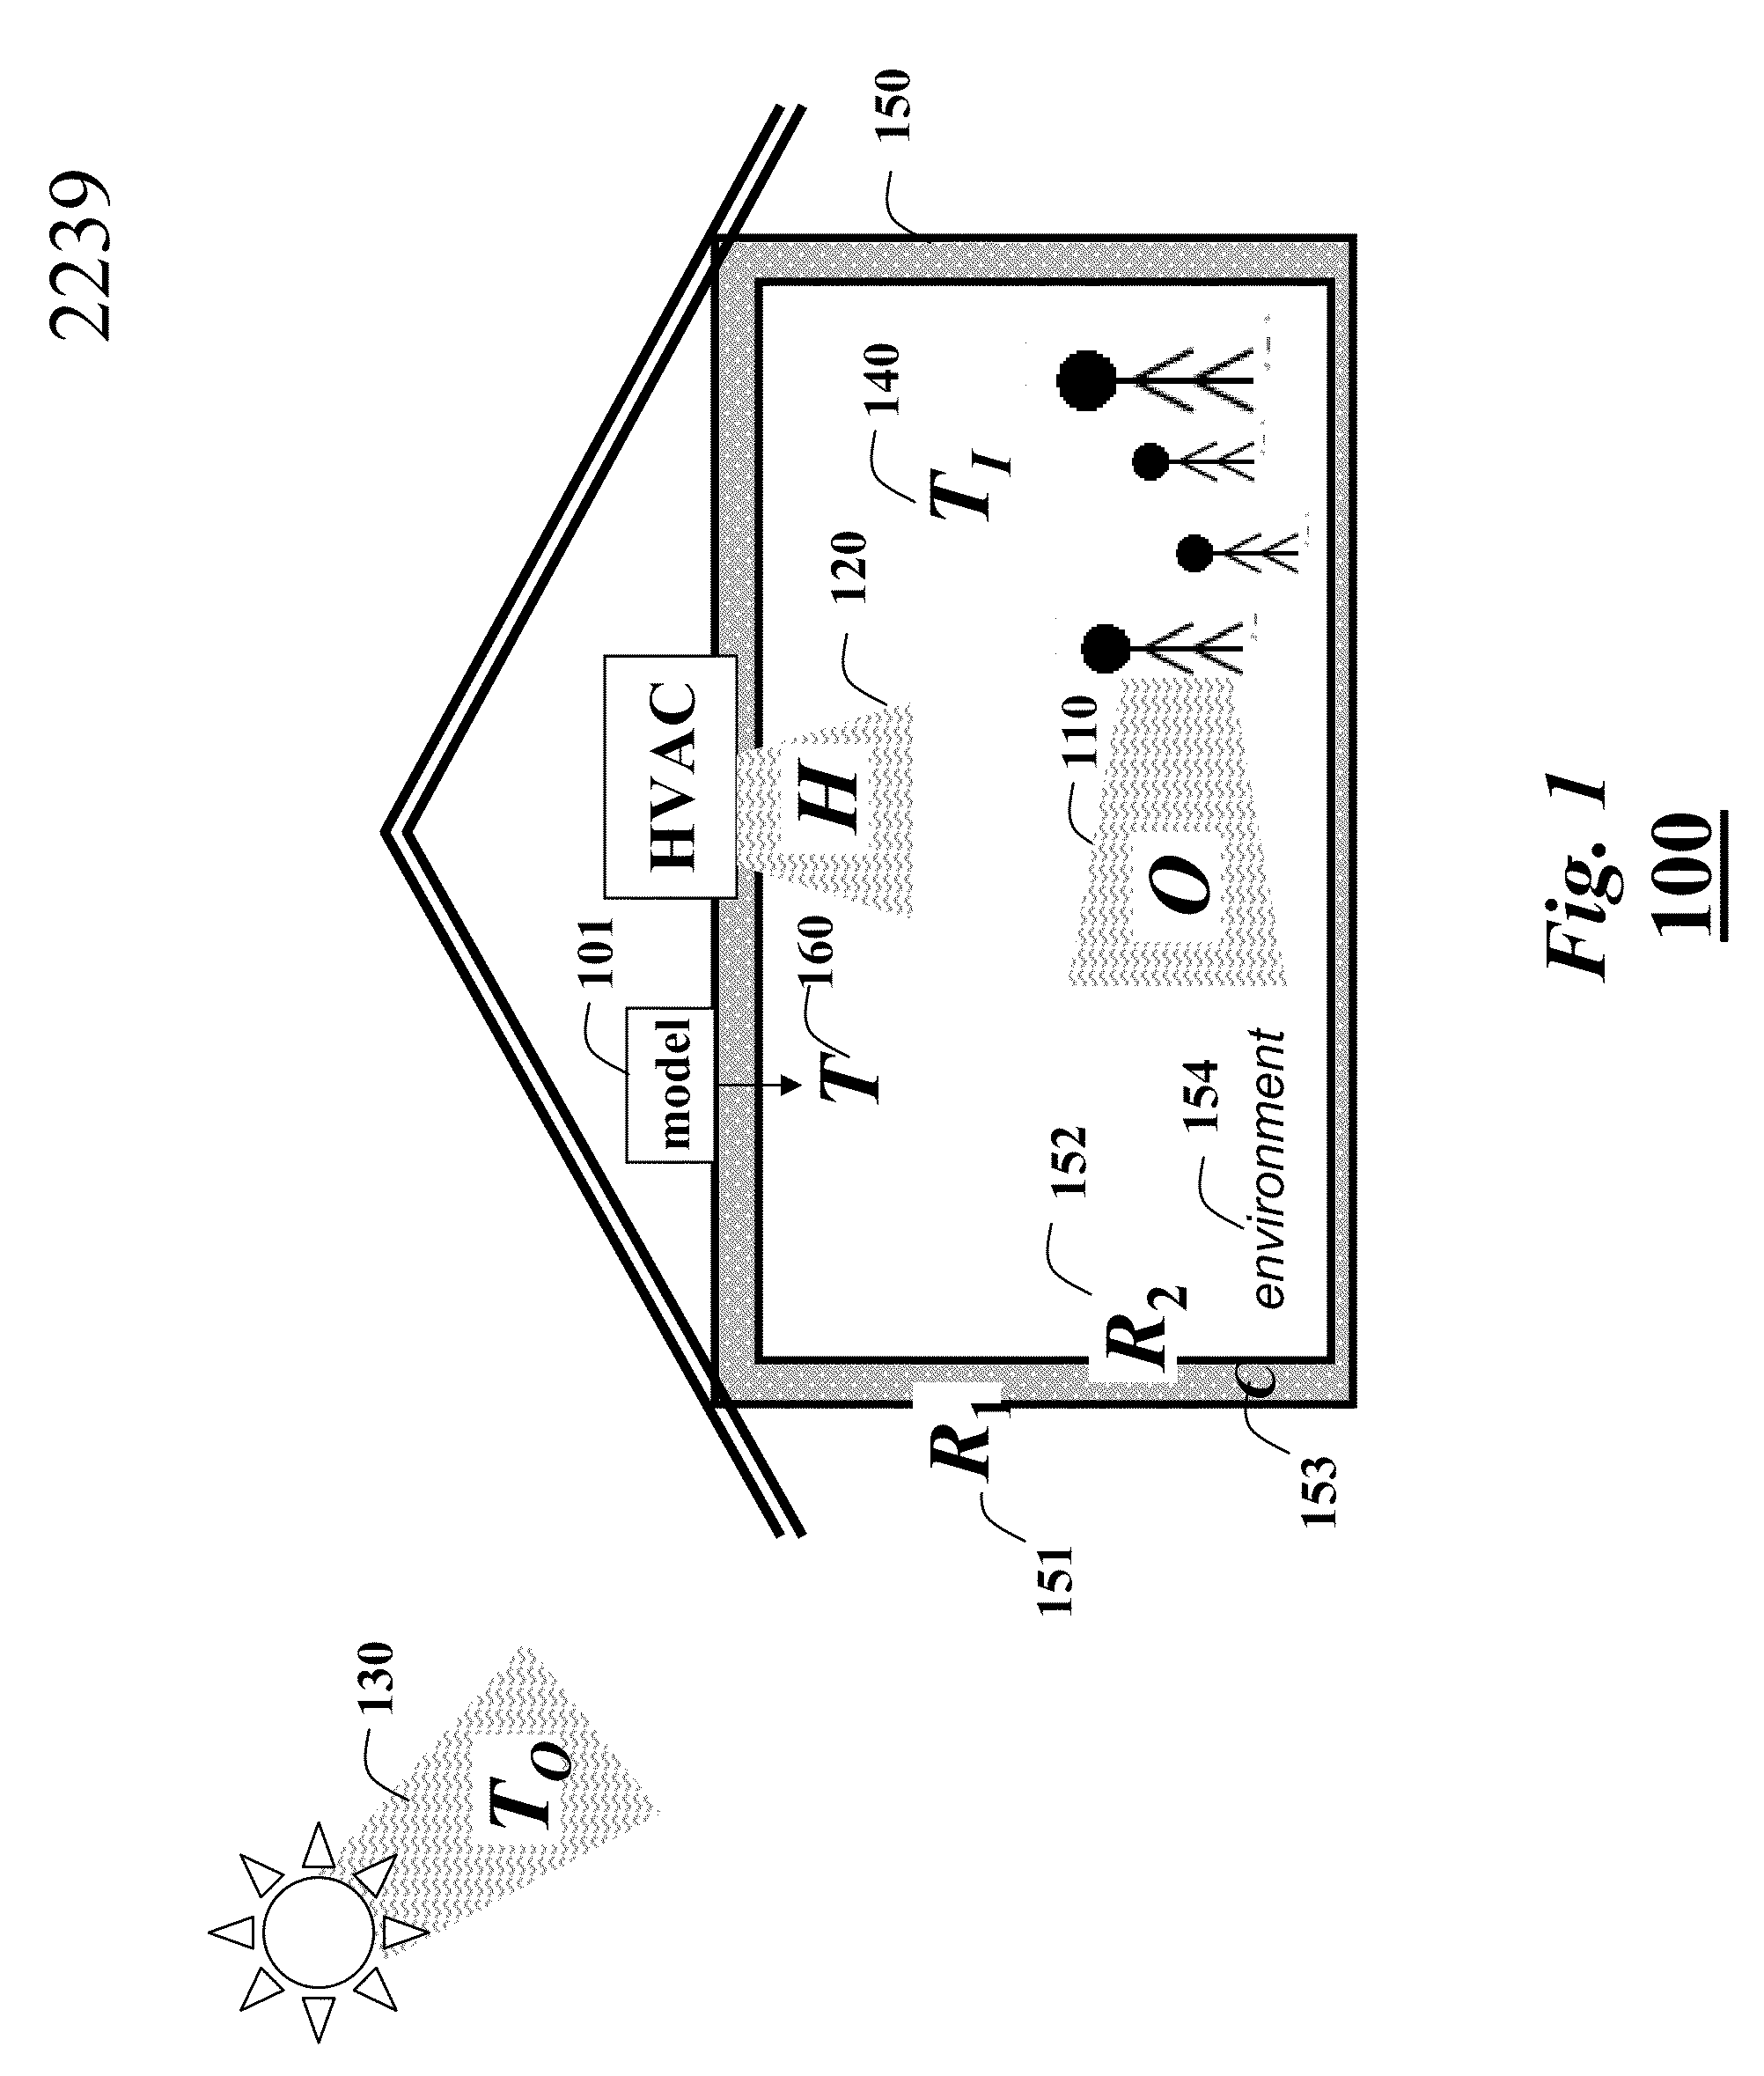 Method for Constructing a Gray-Box Model of a System Using Subspace System Identification